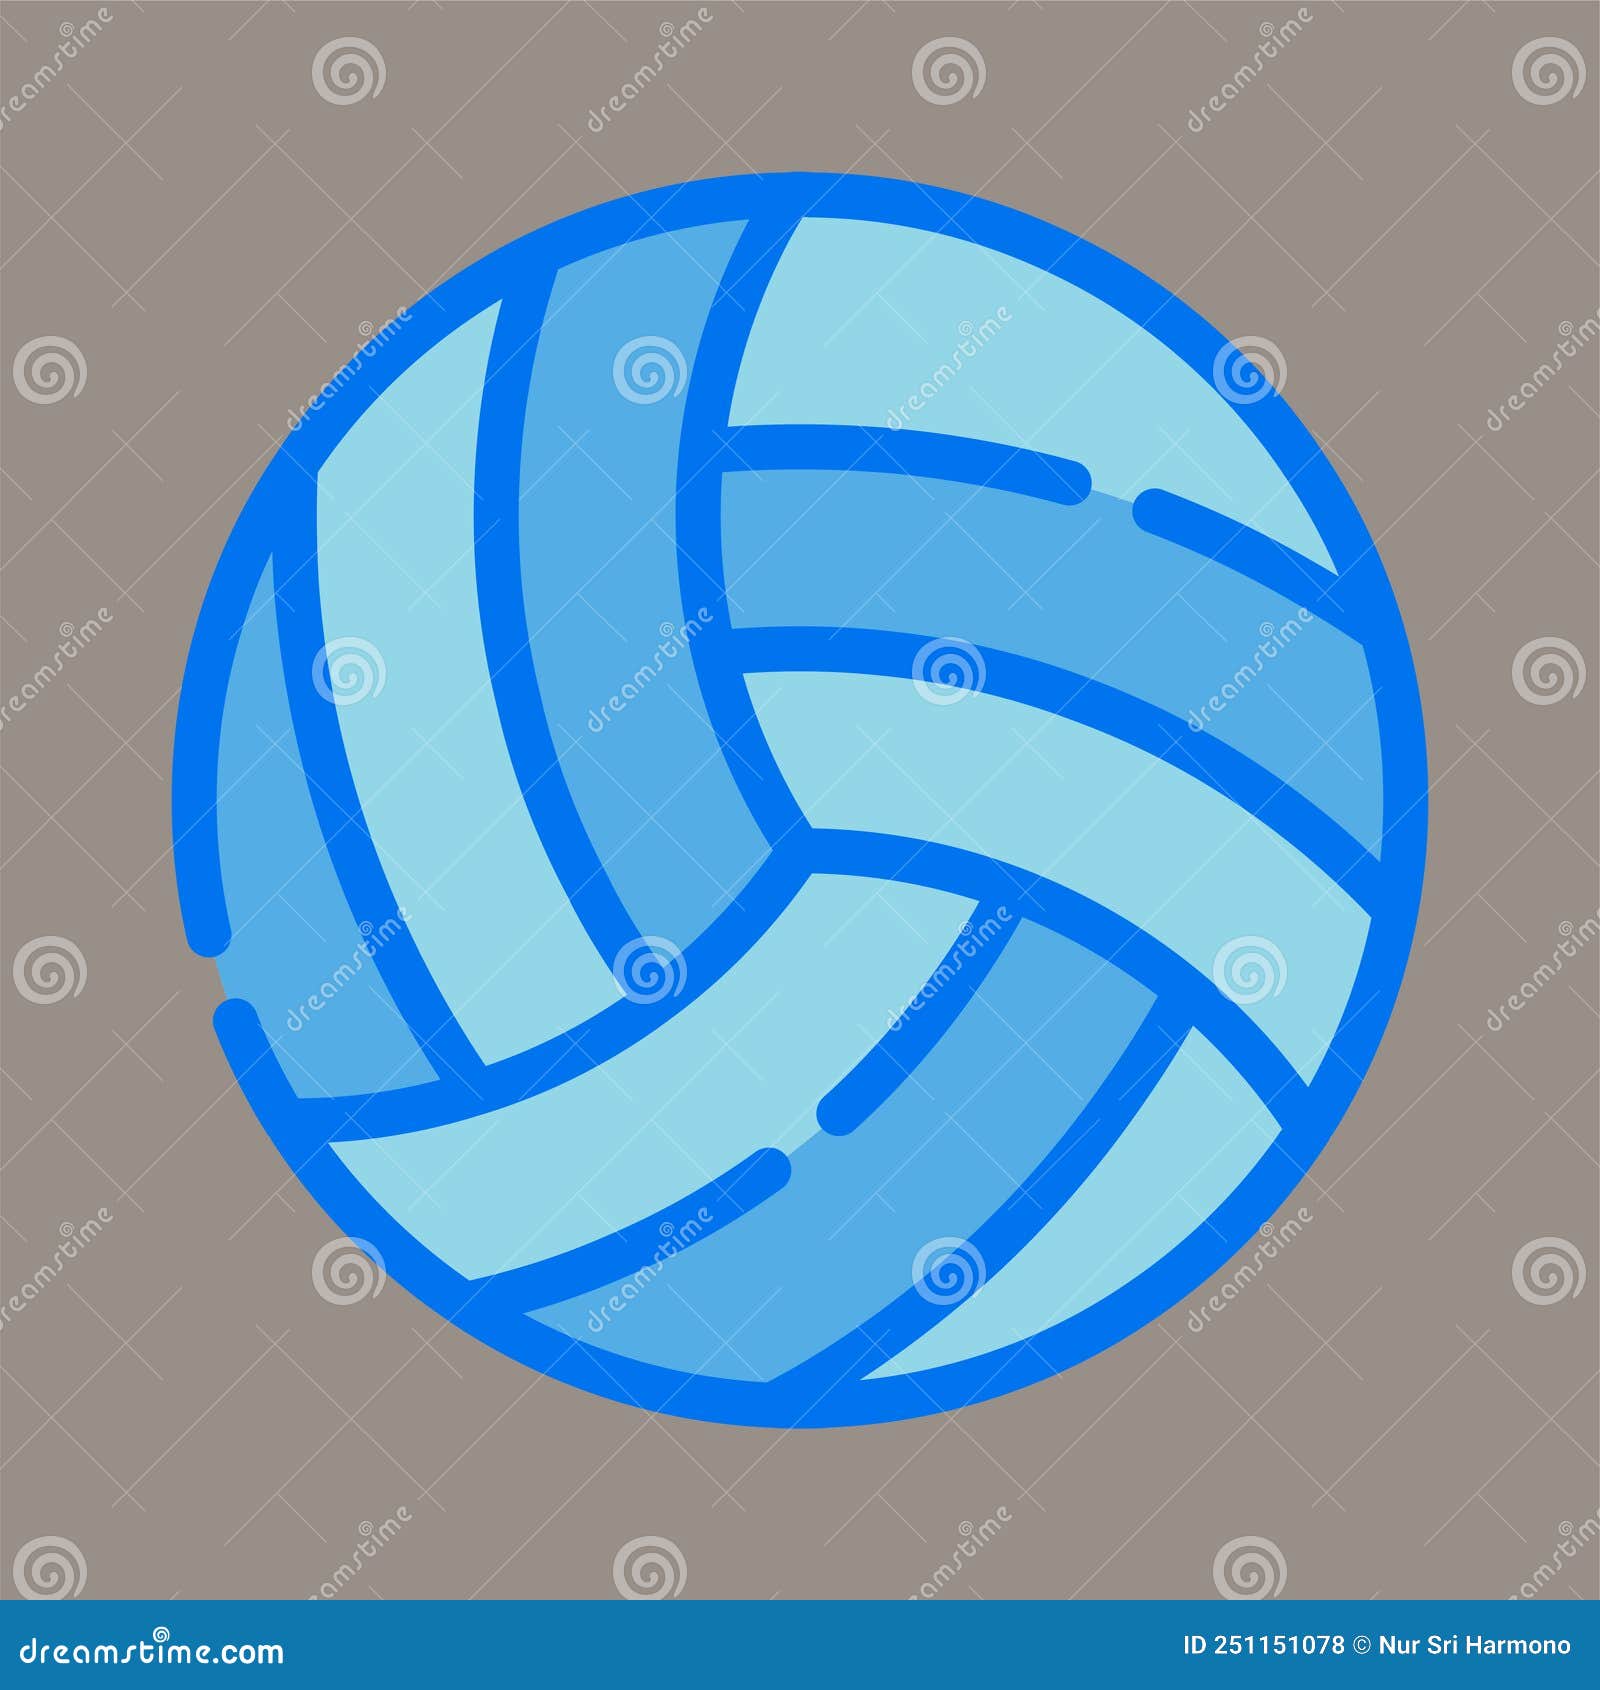 Icon, Logo, Vector Illustration of Volleyball Isolated on Gray ...